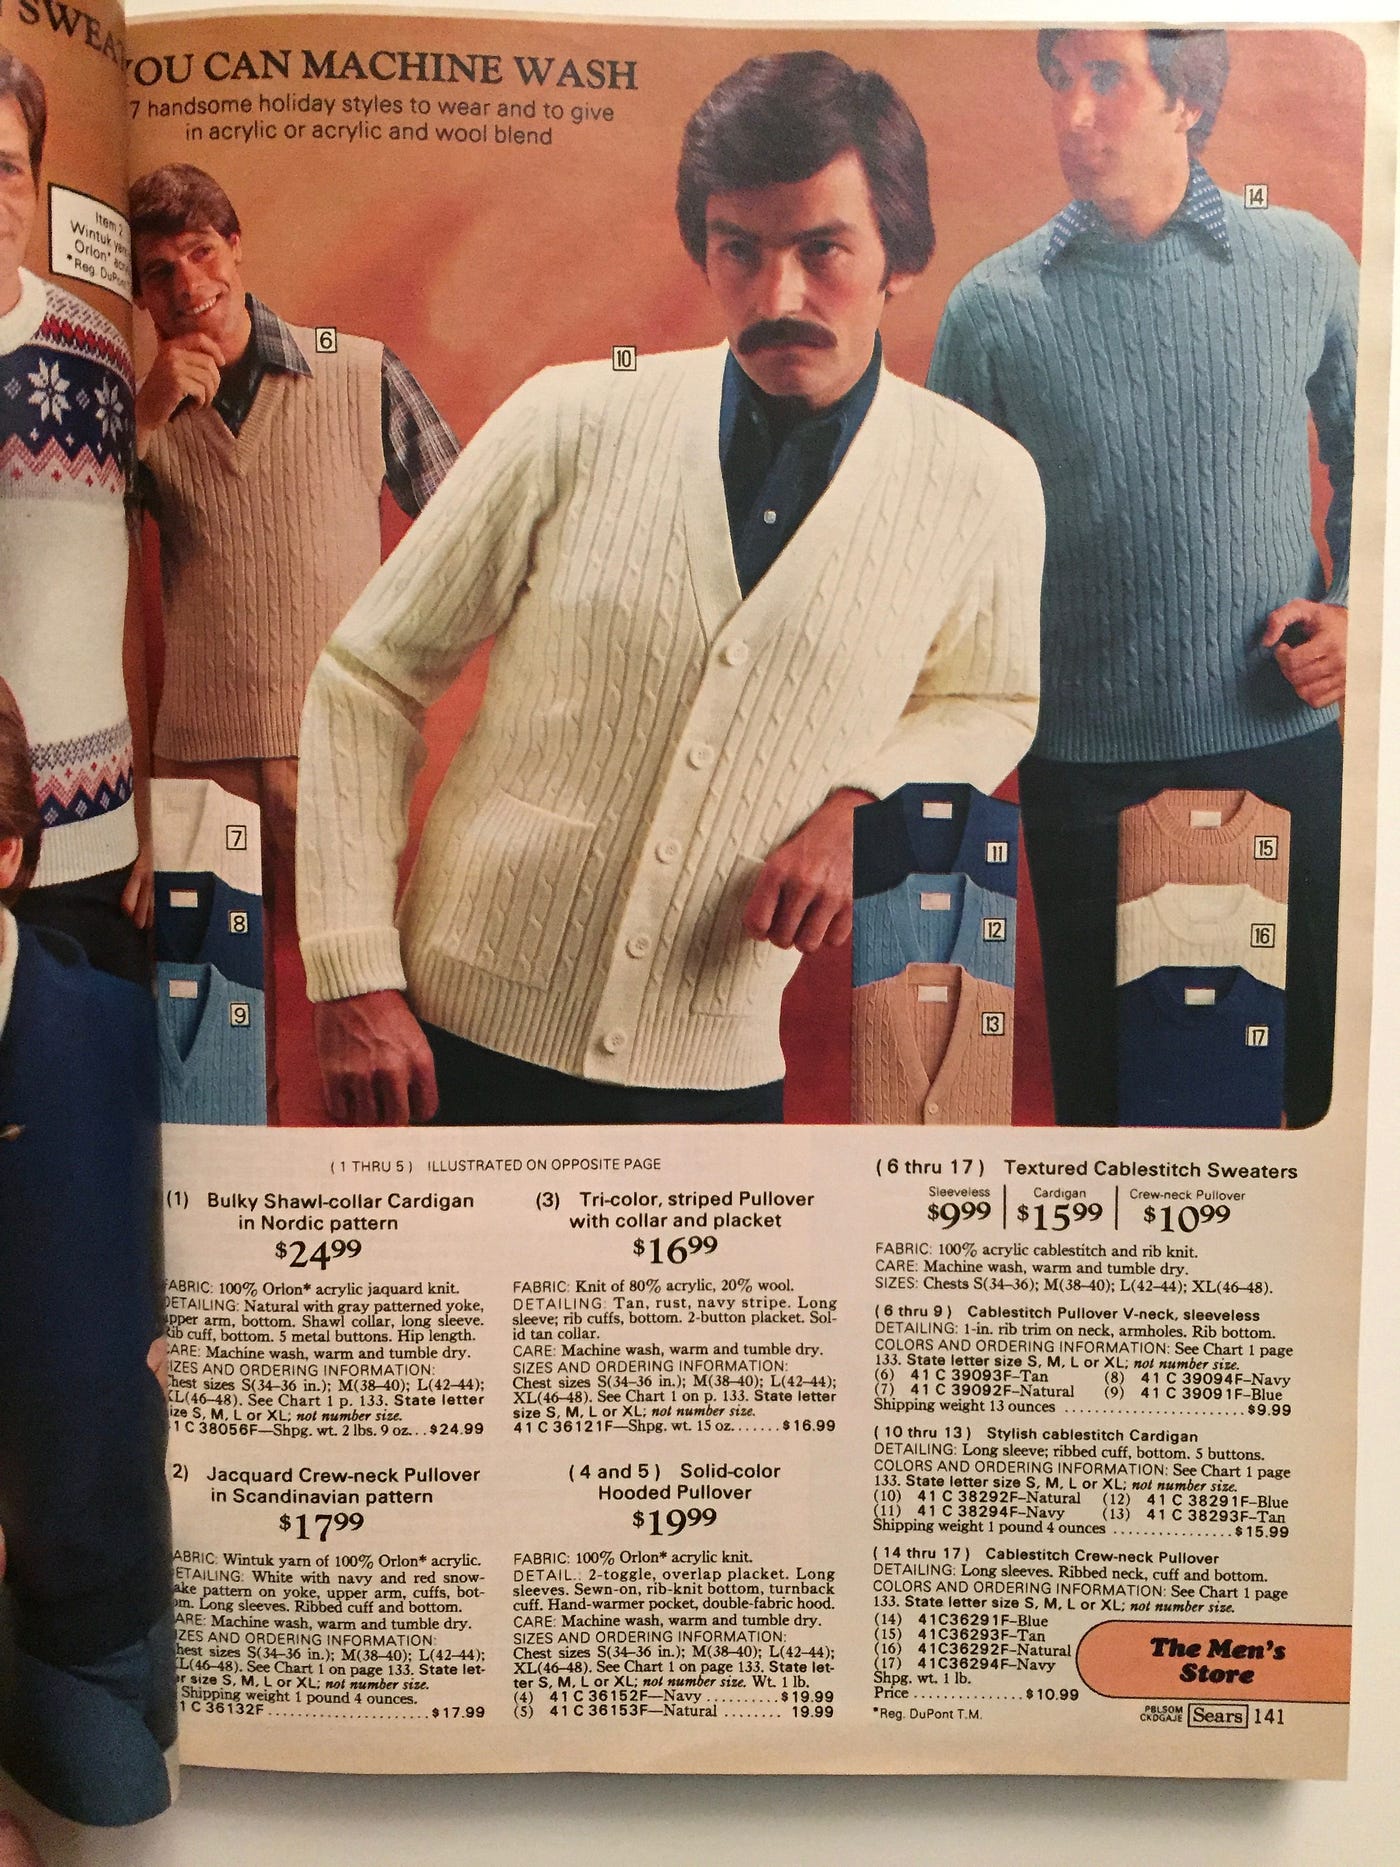 The Sears Wish Book, 1977. It’s the holiday season, so what better ...